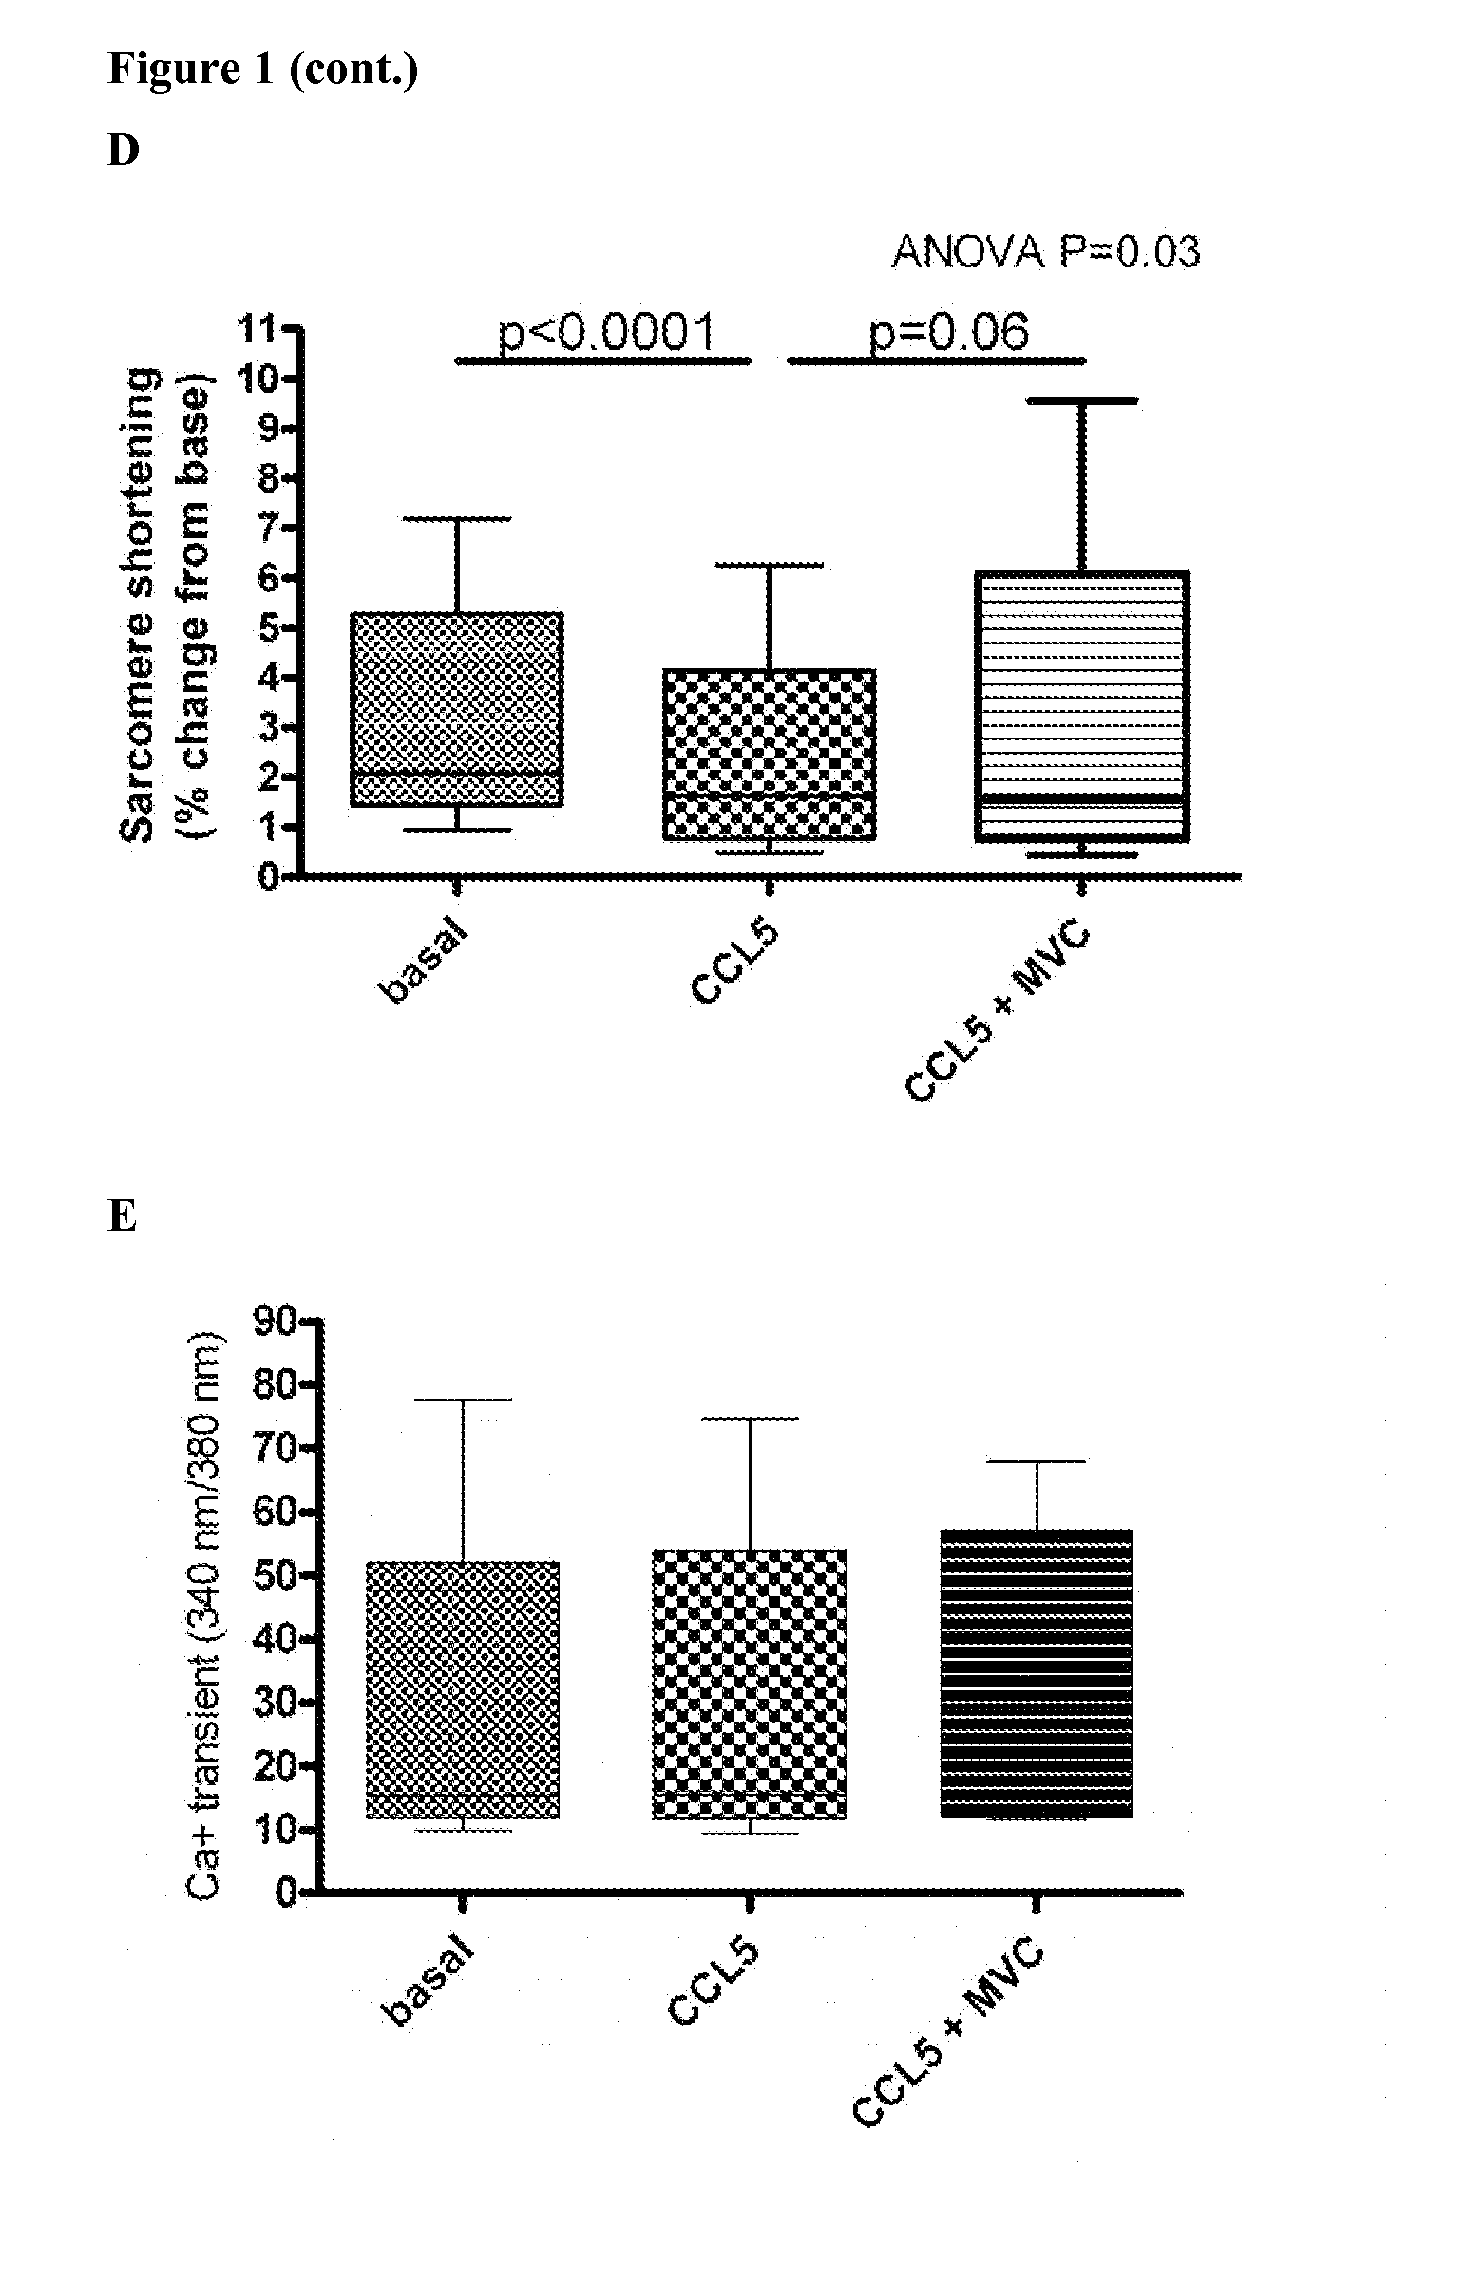 Methods for Treating or Preventing Cardiac and Neurological Disorders Using Chemokine Receptor Antagonists